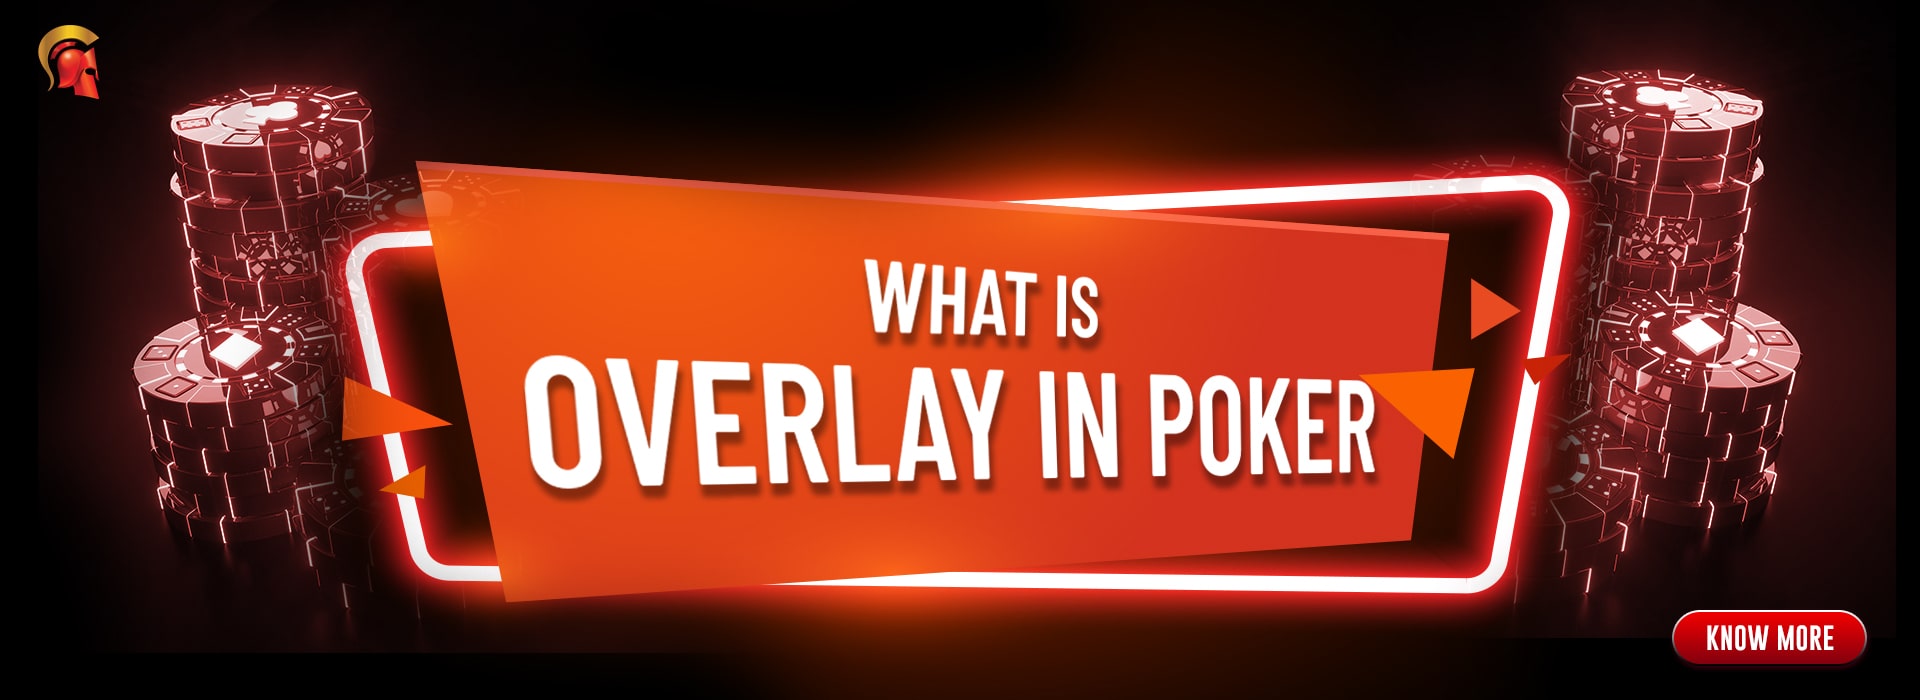 What is overlay in poker